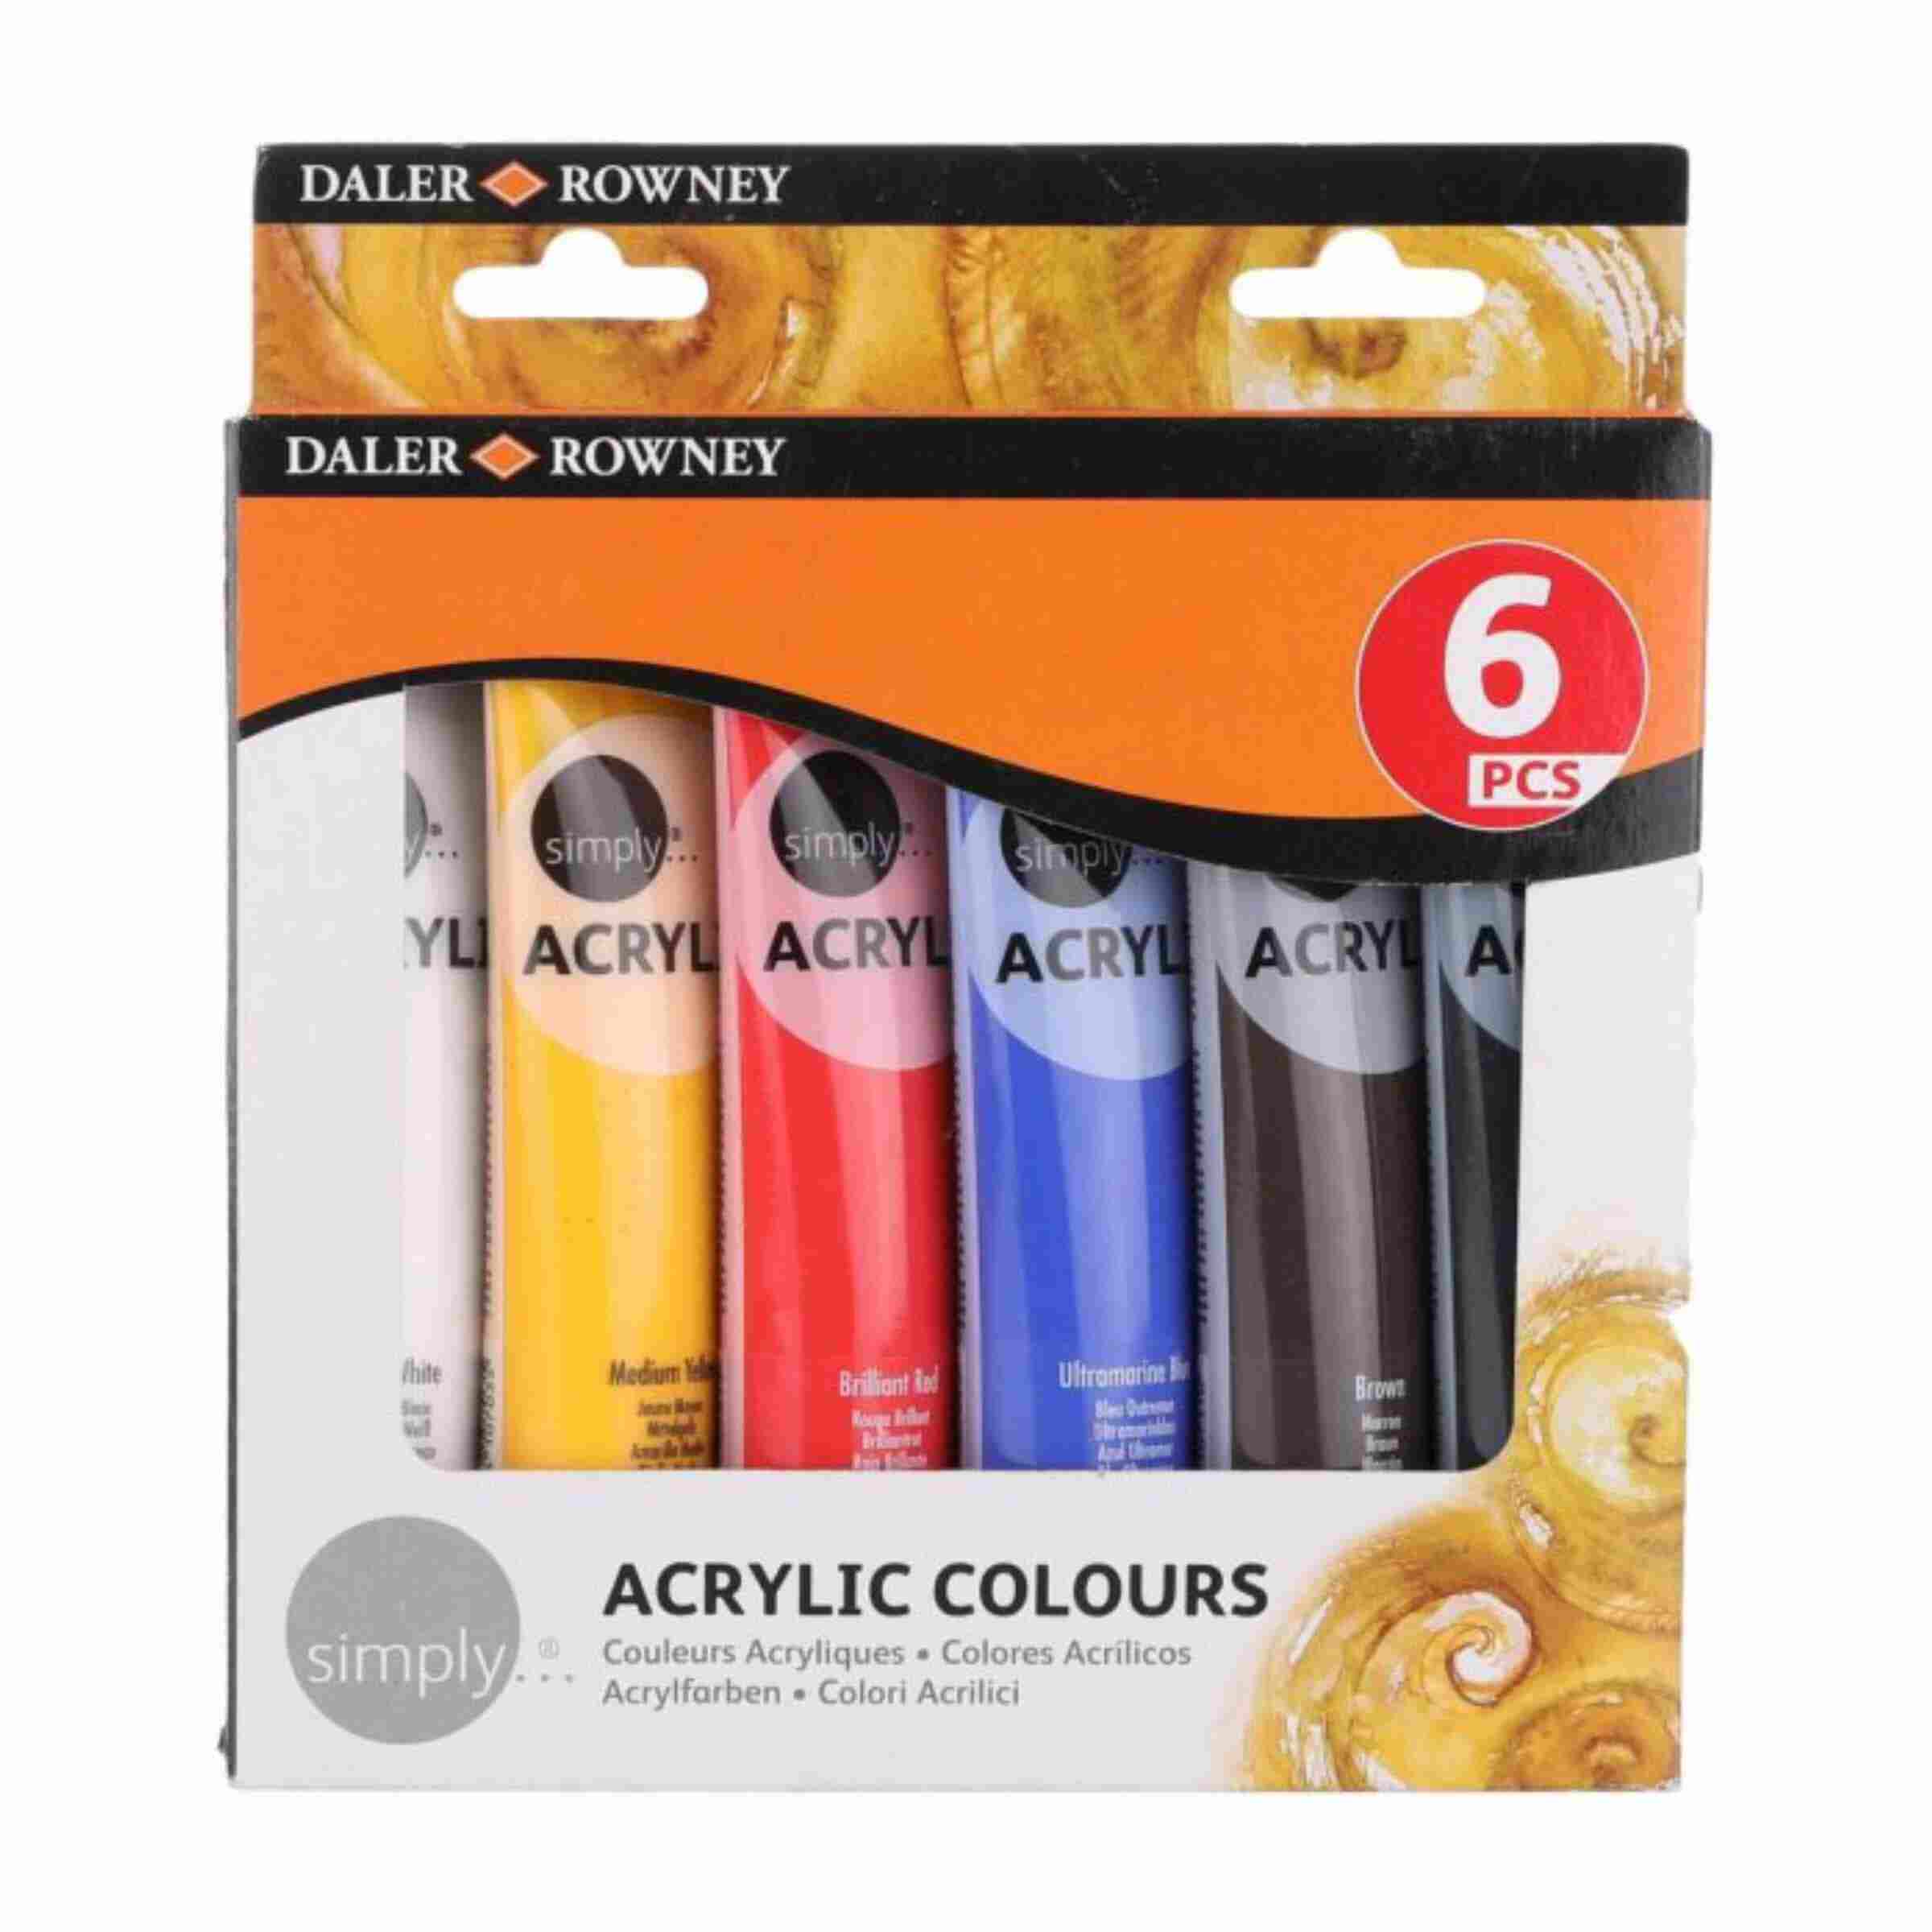 Daler Rowney Simply Acrylic Paints 75ml Pack of 6